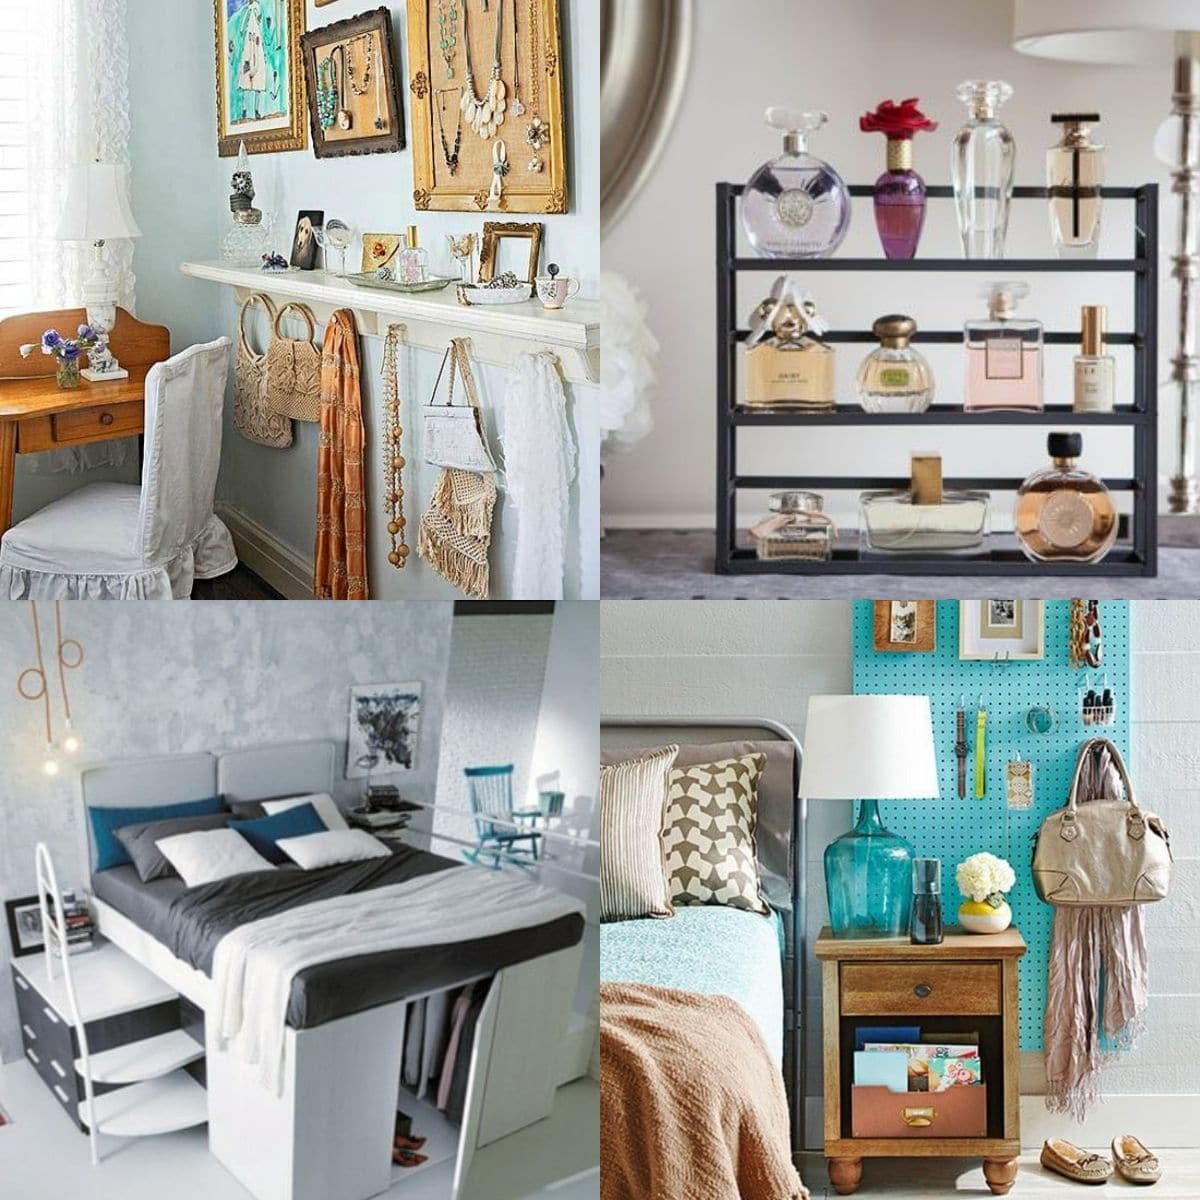 Increase storage in your small rooms with the fun hacks.

Keep your room both organized and stylish. 😉

#Storage #StorageIDeas #StorageSpace #SmallRooms #SmallRoomStorage #SmallRoomStorageIDeas

 LocalInfoForYou.com/314622/small-r…